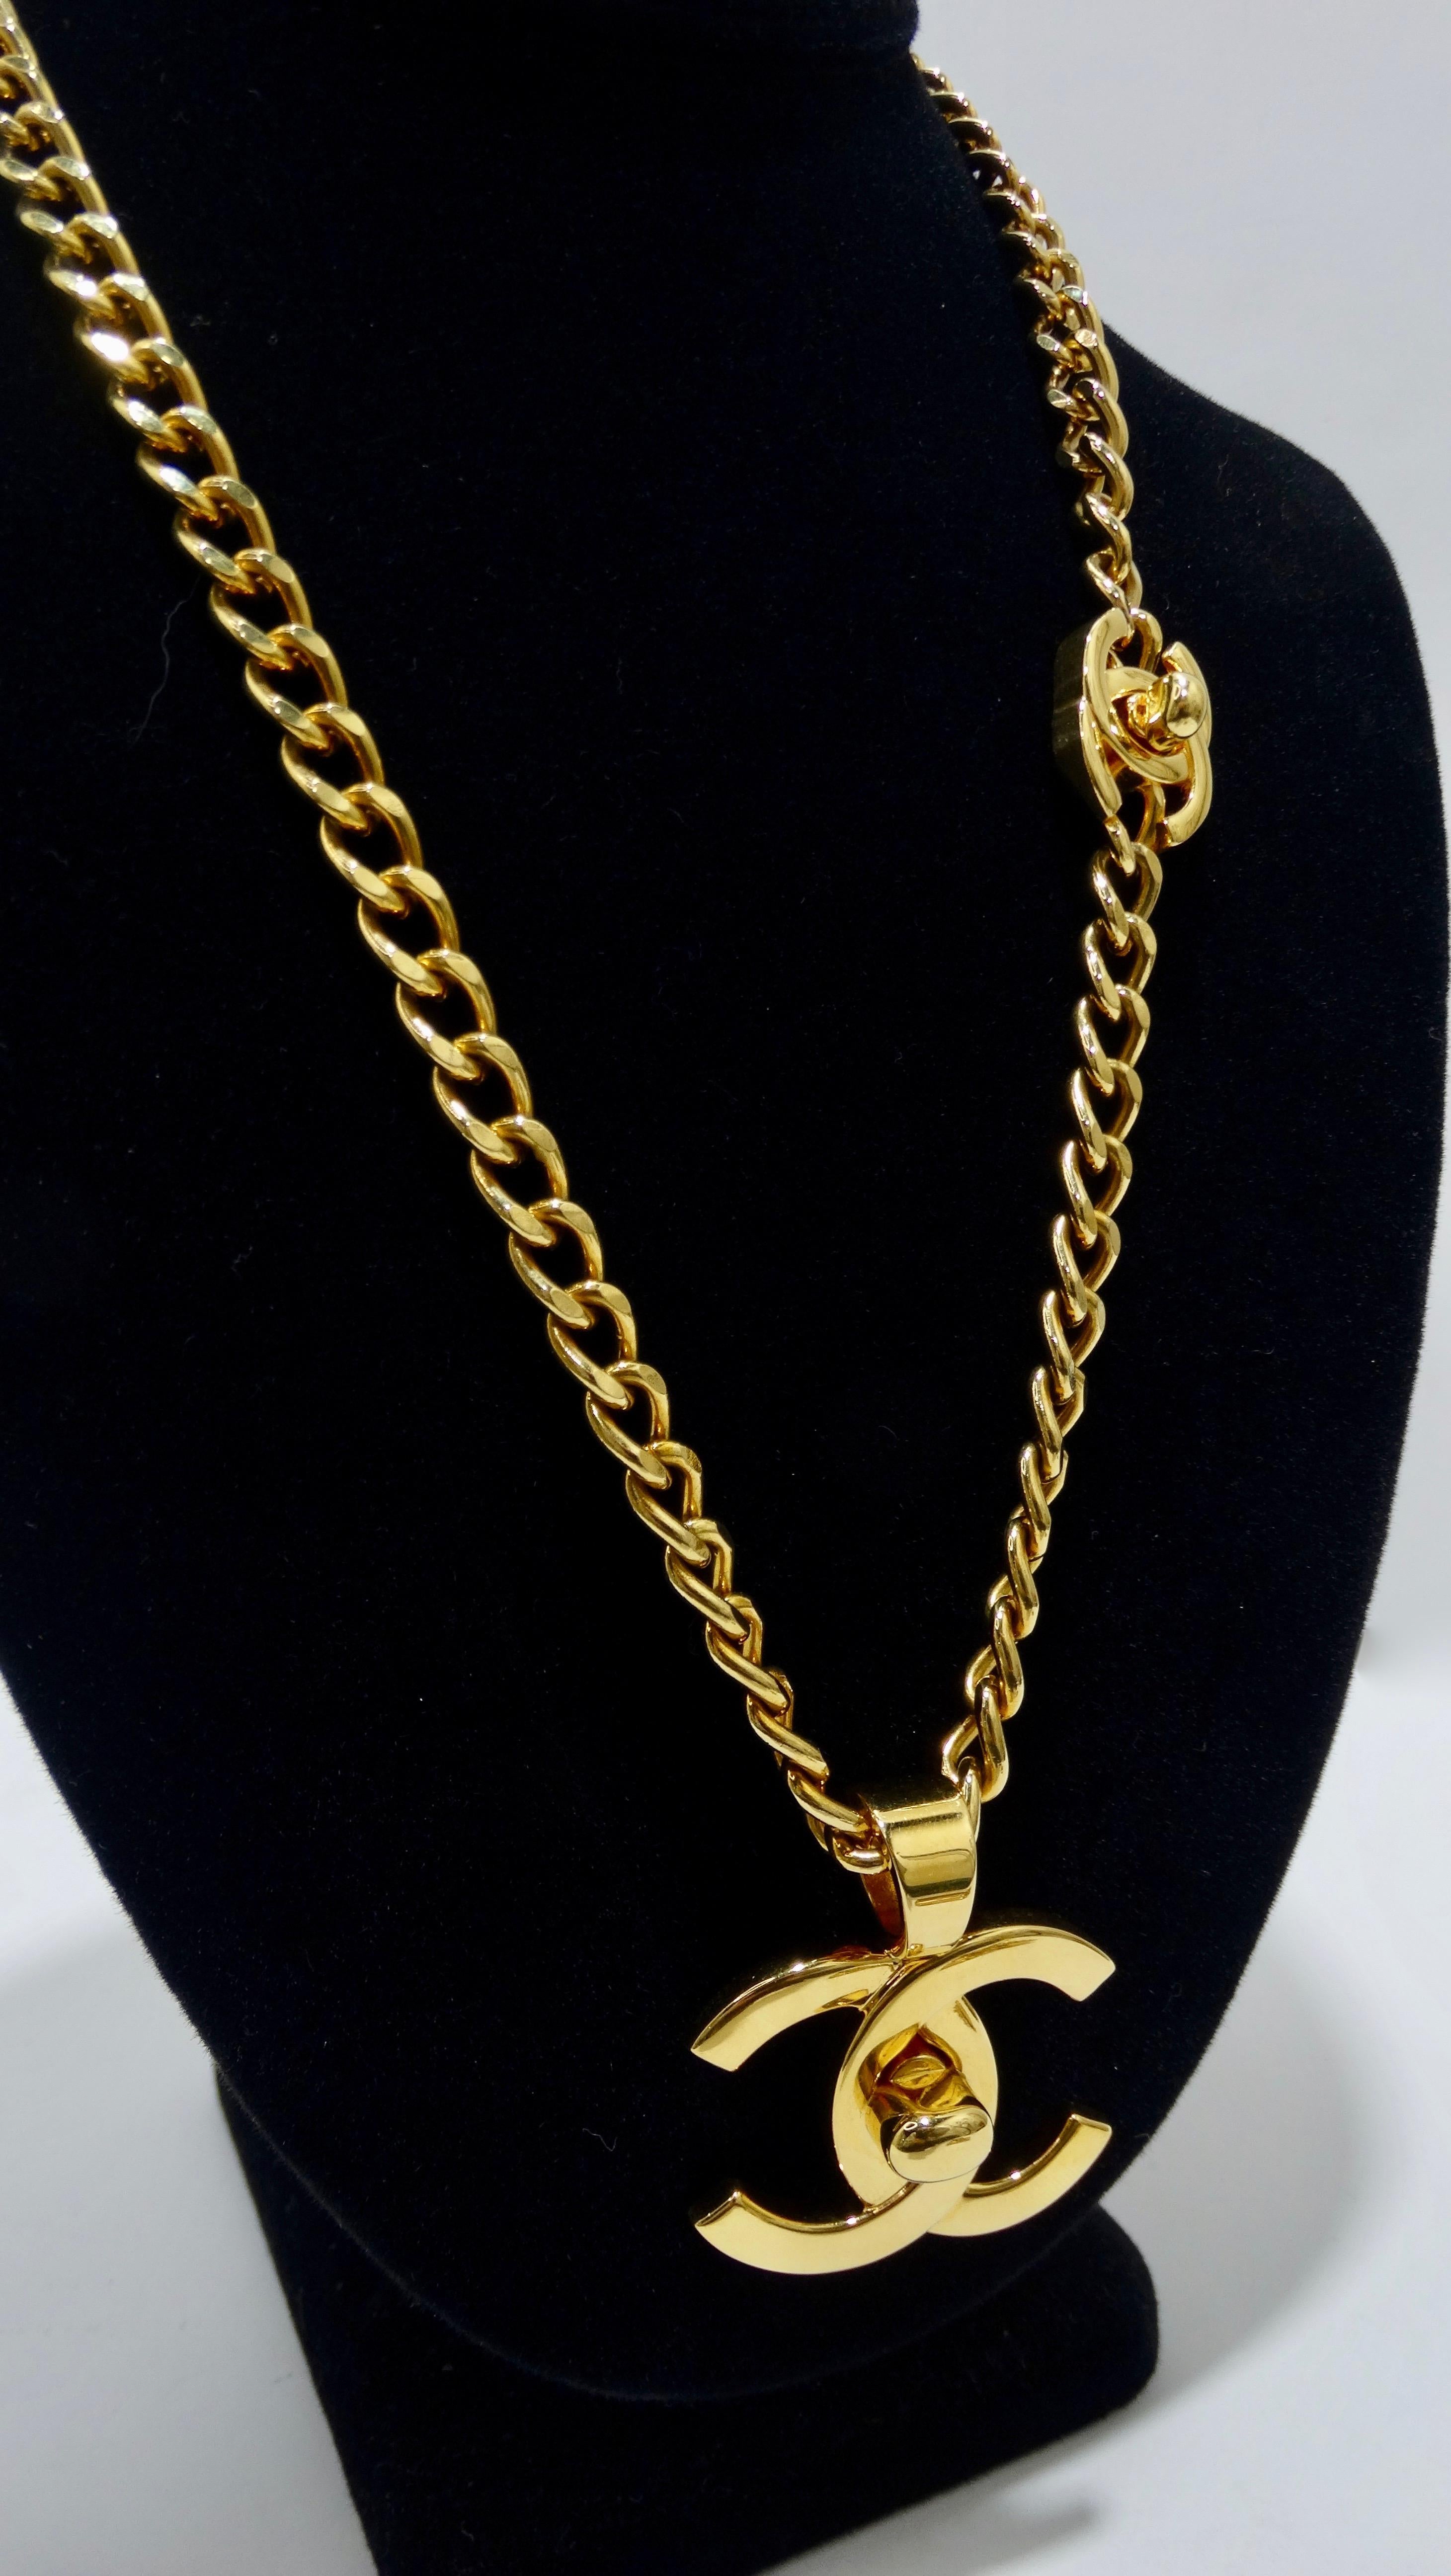 Women's or Men's Chanel 1996 CC Turn-Lock Necklace 